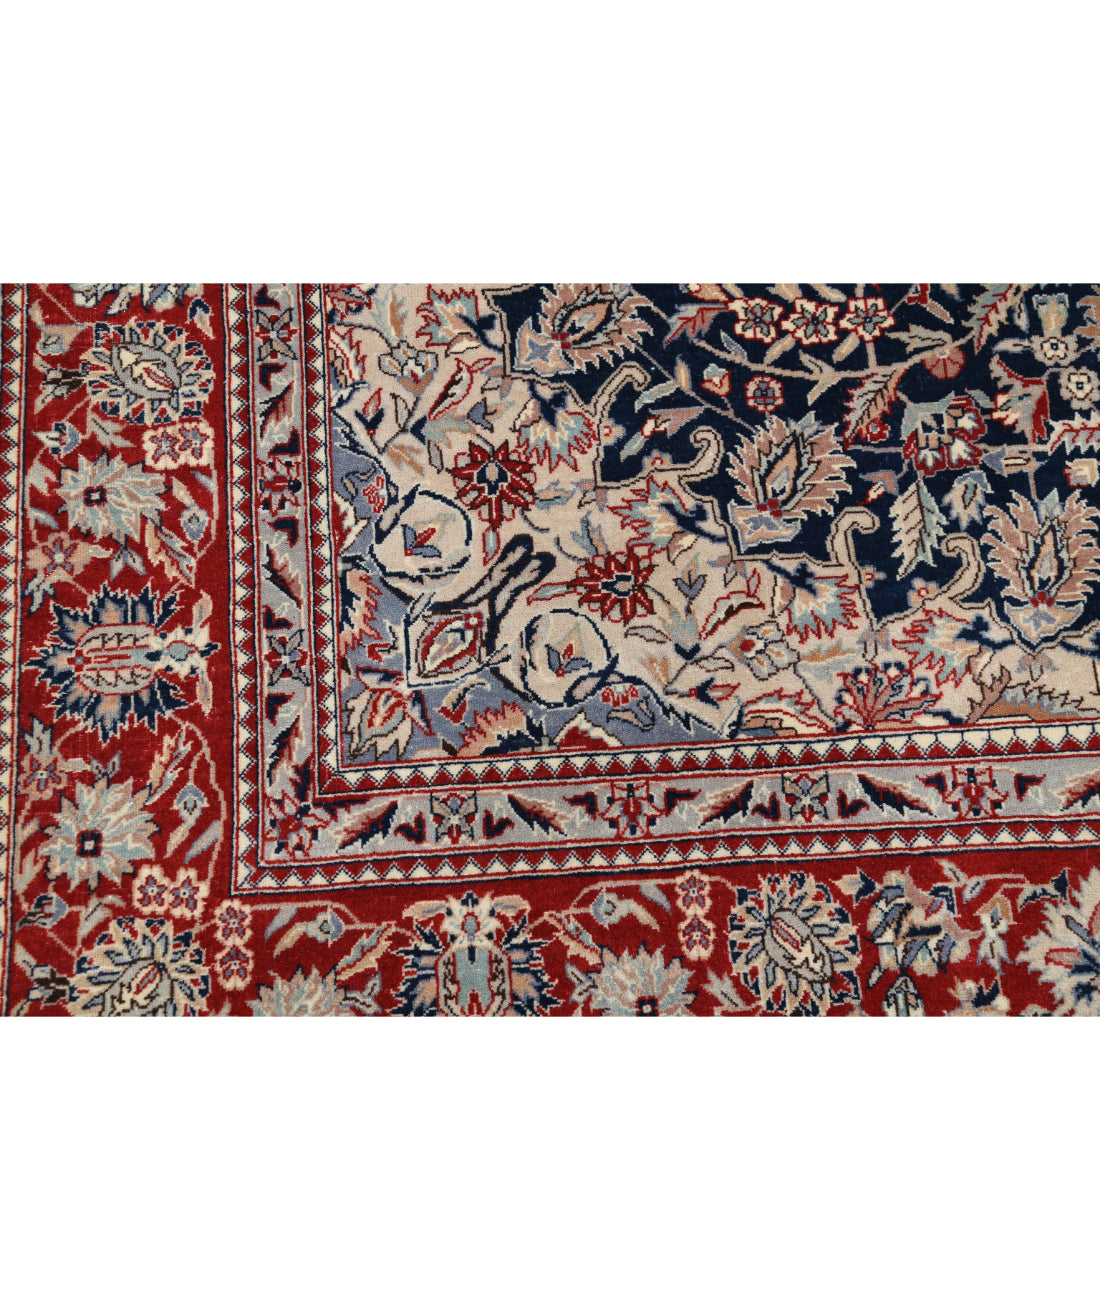 Hand Knotted Heritage Fine Persian Style Wool Rug - 6'6'' x 8'0'' 6'6'' x 8'0'' (195 X 240) / Blue / Red